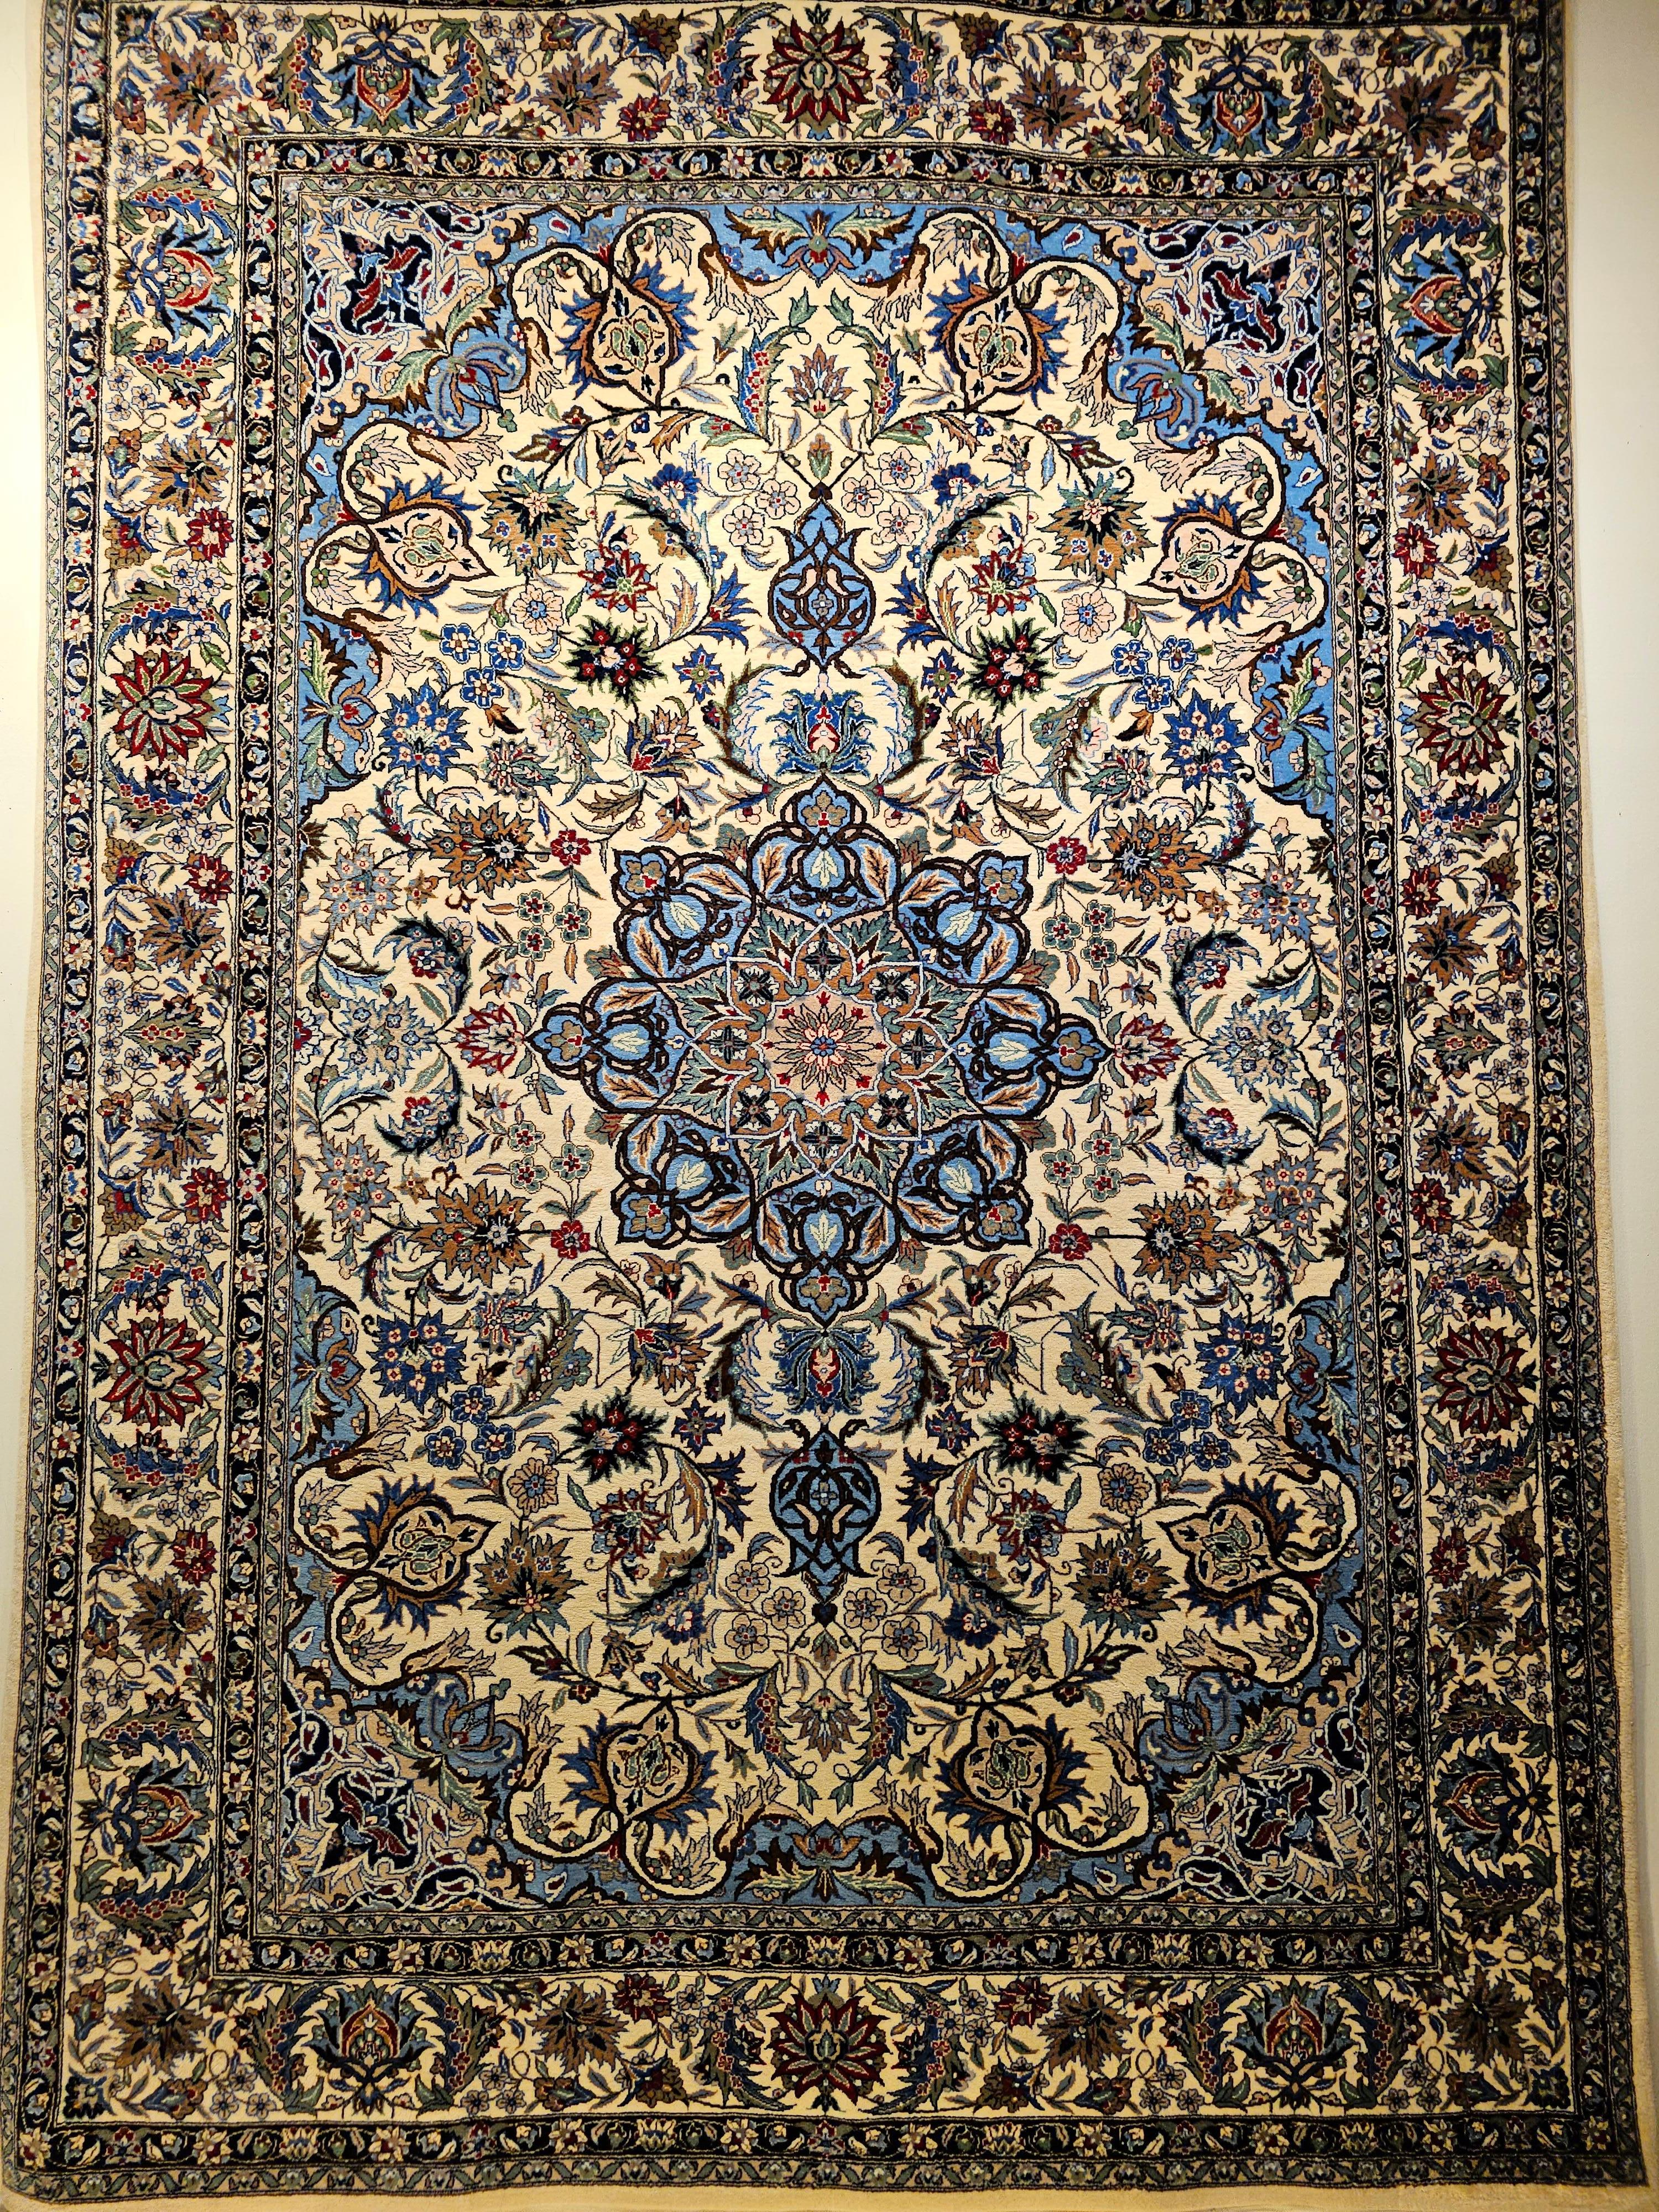 Vintage Tabriz Rug in Floral Design With French Blue, Green, and Ivory Colors.   The design of the rug is similar to the classic Persian Tabriz rugs that were woven in the 16th and 17th centuries. The use of the fine wool and wonderful colors makes